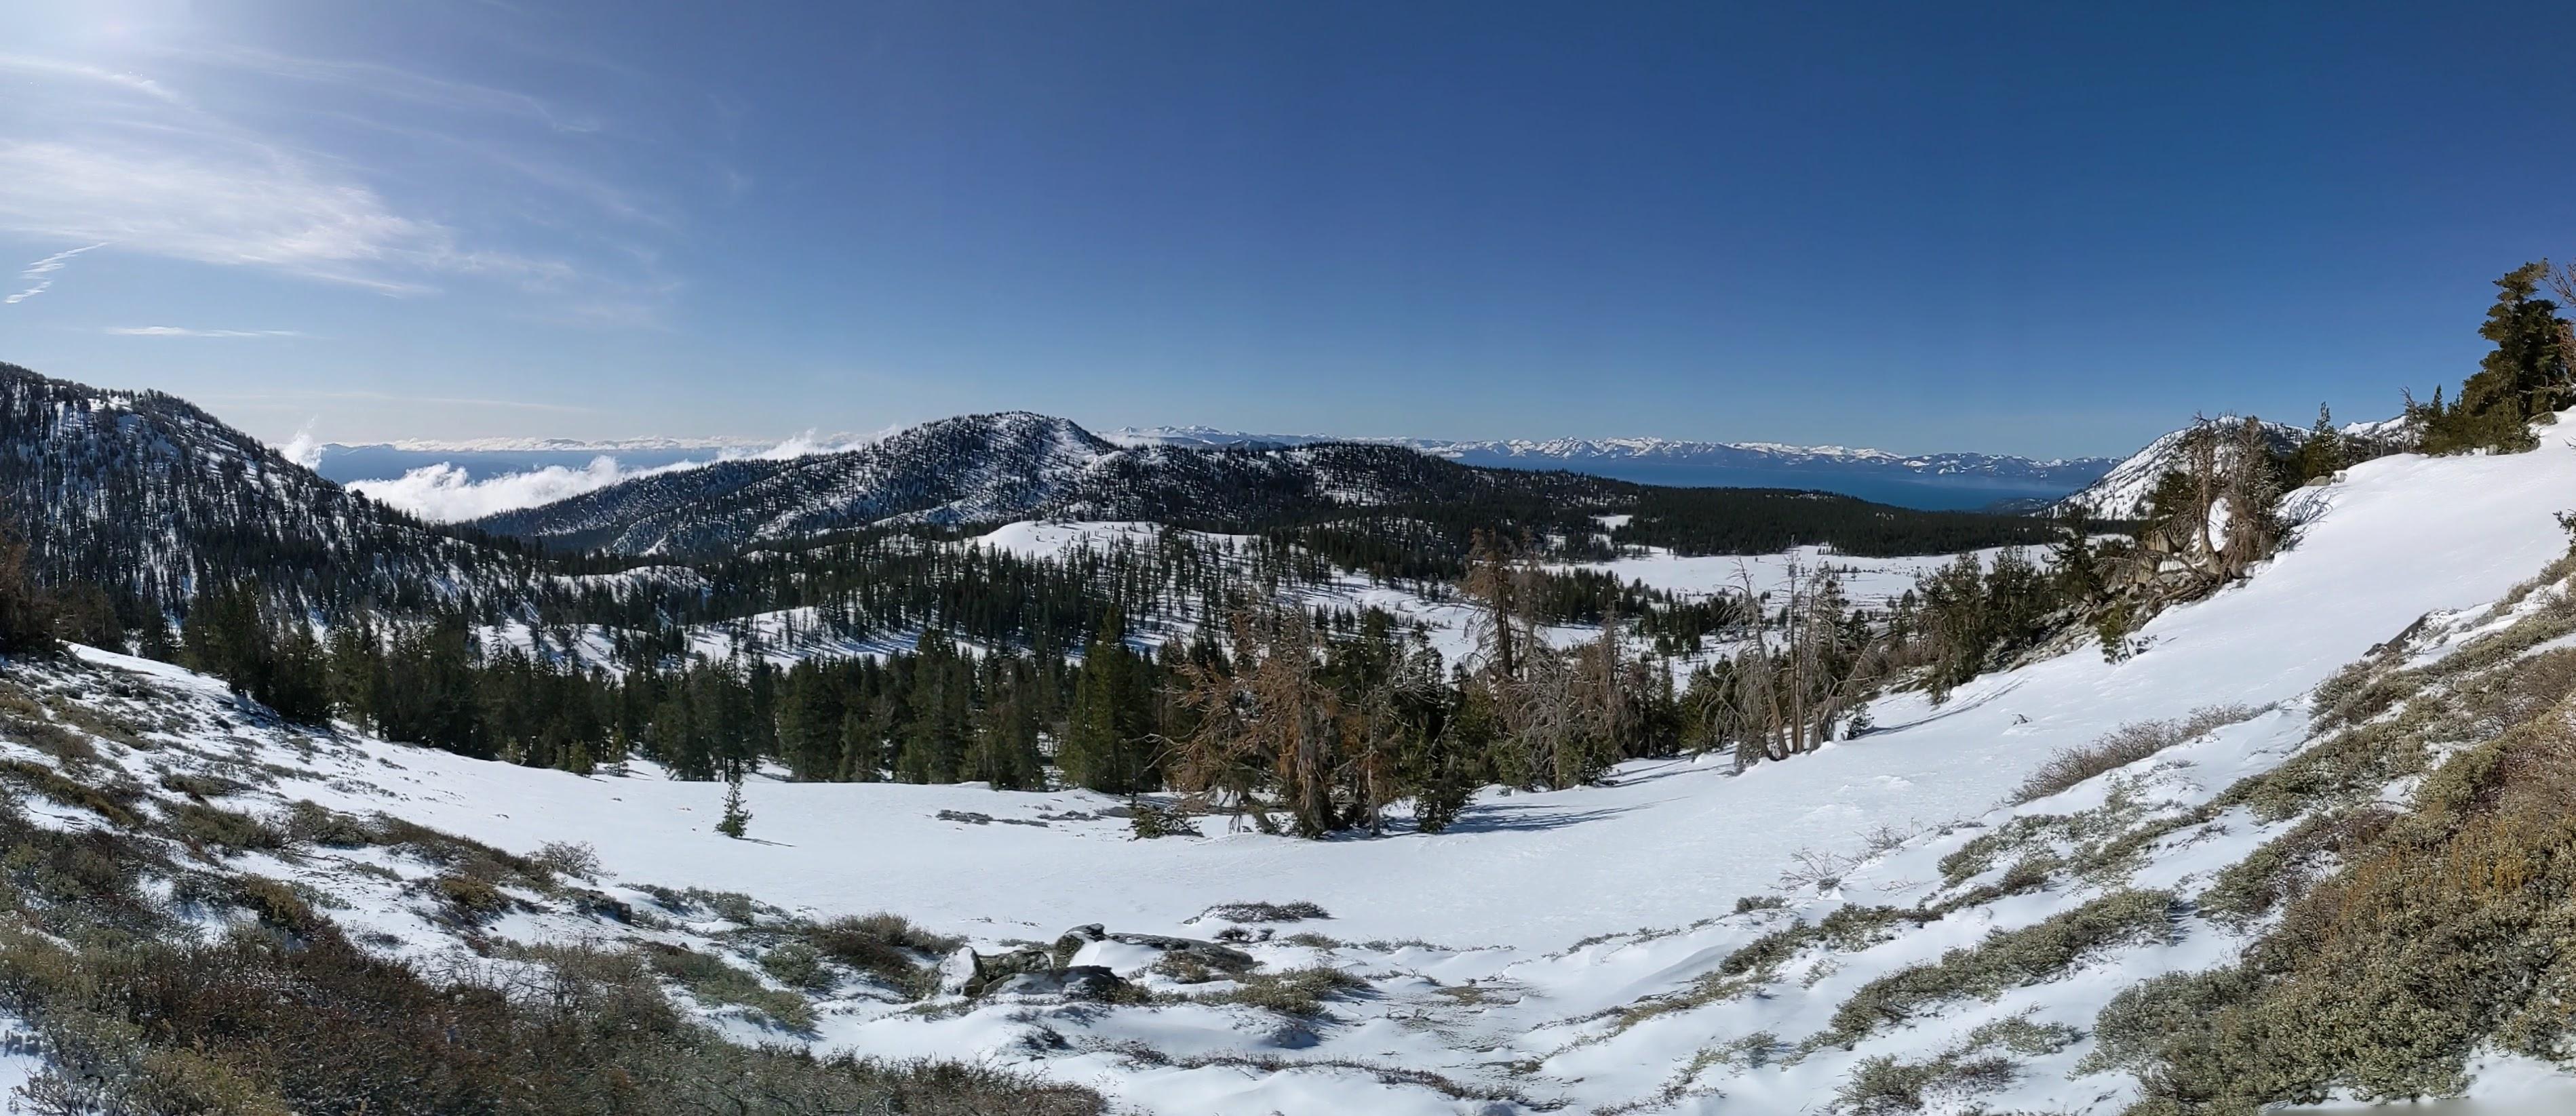 On the trail, lake Tahoe vistas start to open up